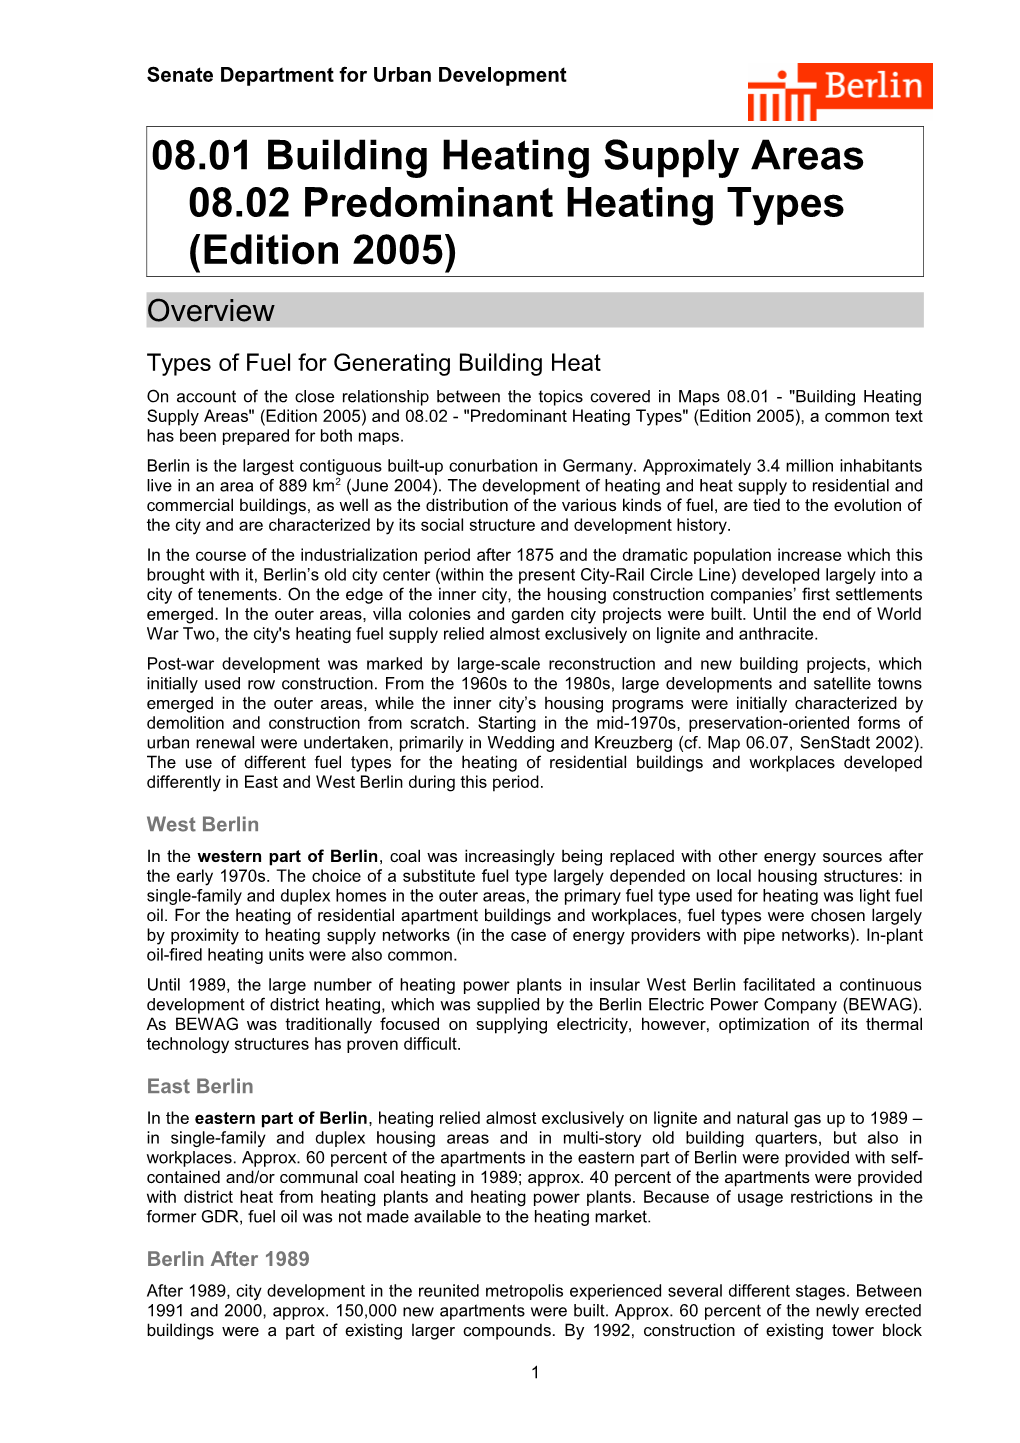 08.01 Building Heating Supply Areas / 08.02 Predominant Heating Types (Edition 2005)